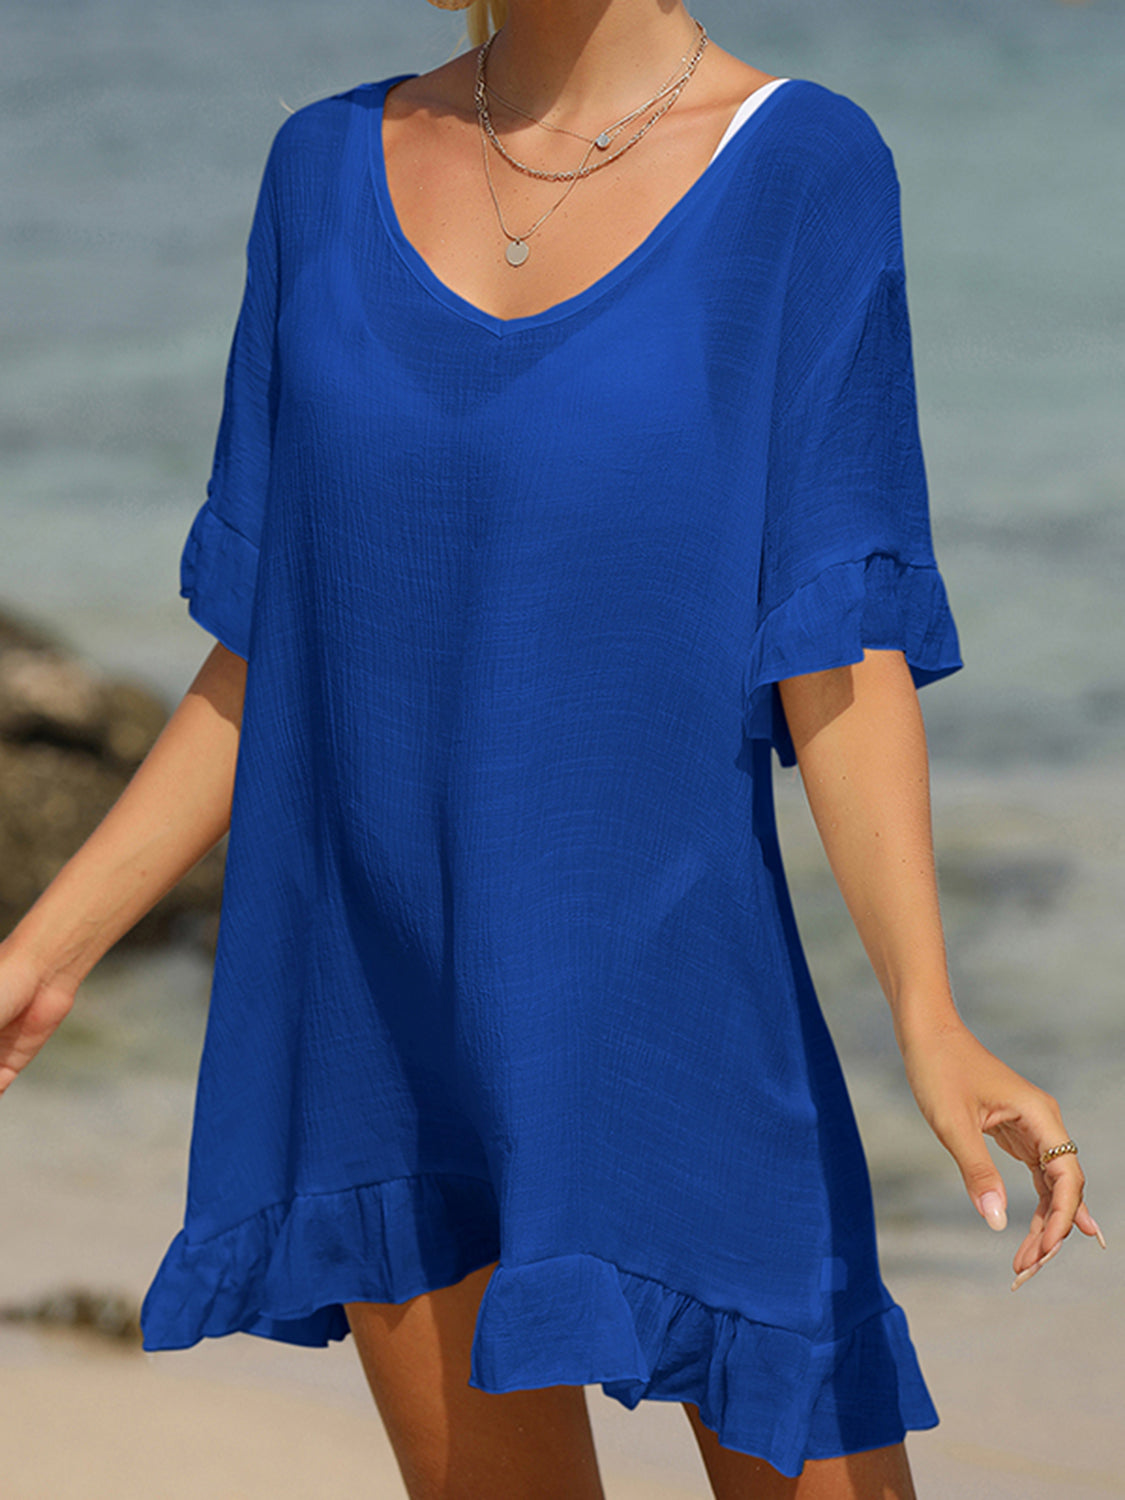 Sunset Vacation  Tied Ruffled Half Sleeve Beach Cover Up Sunset and Swim Royal Blue One Size 